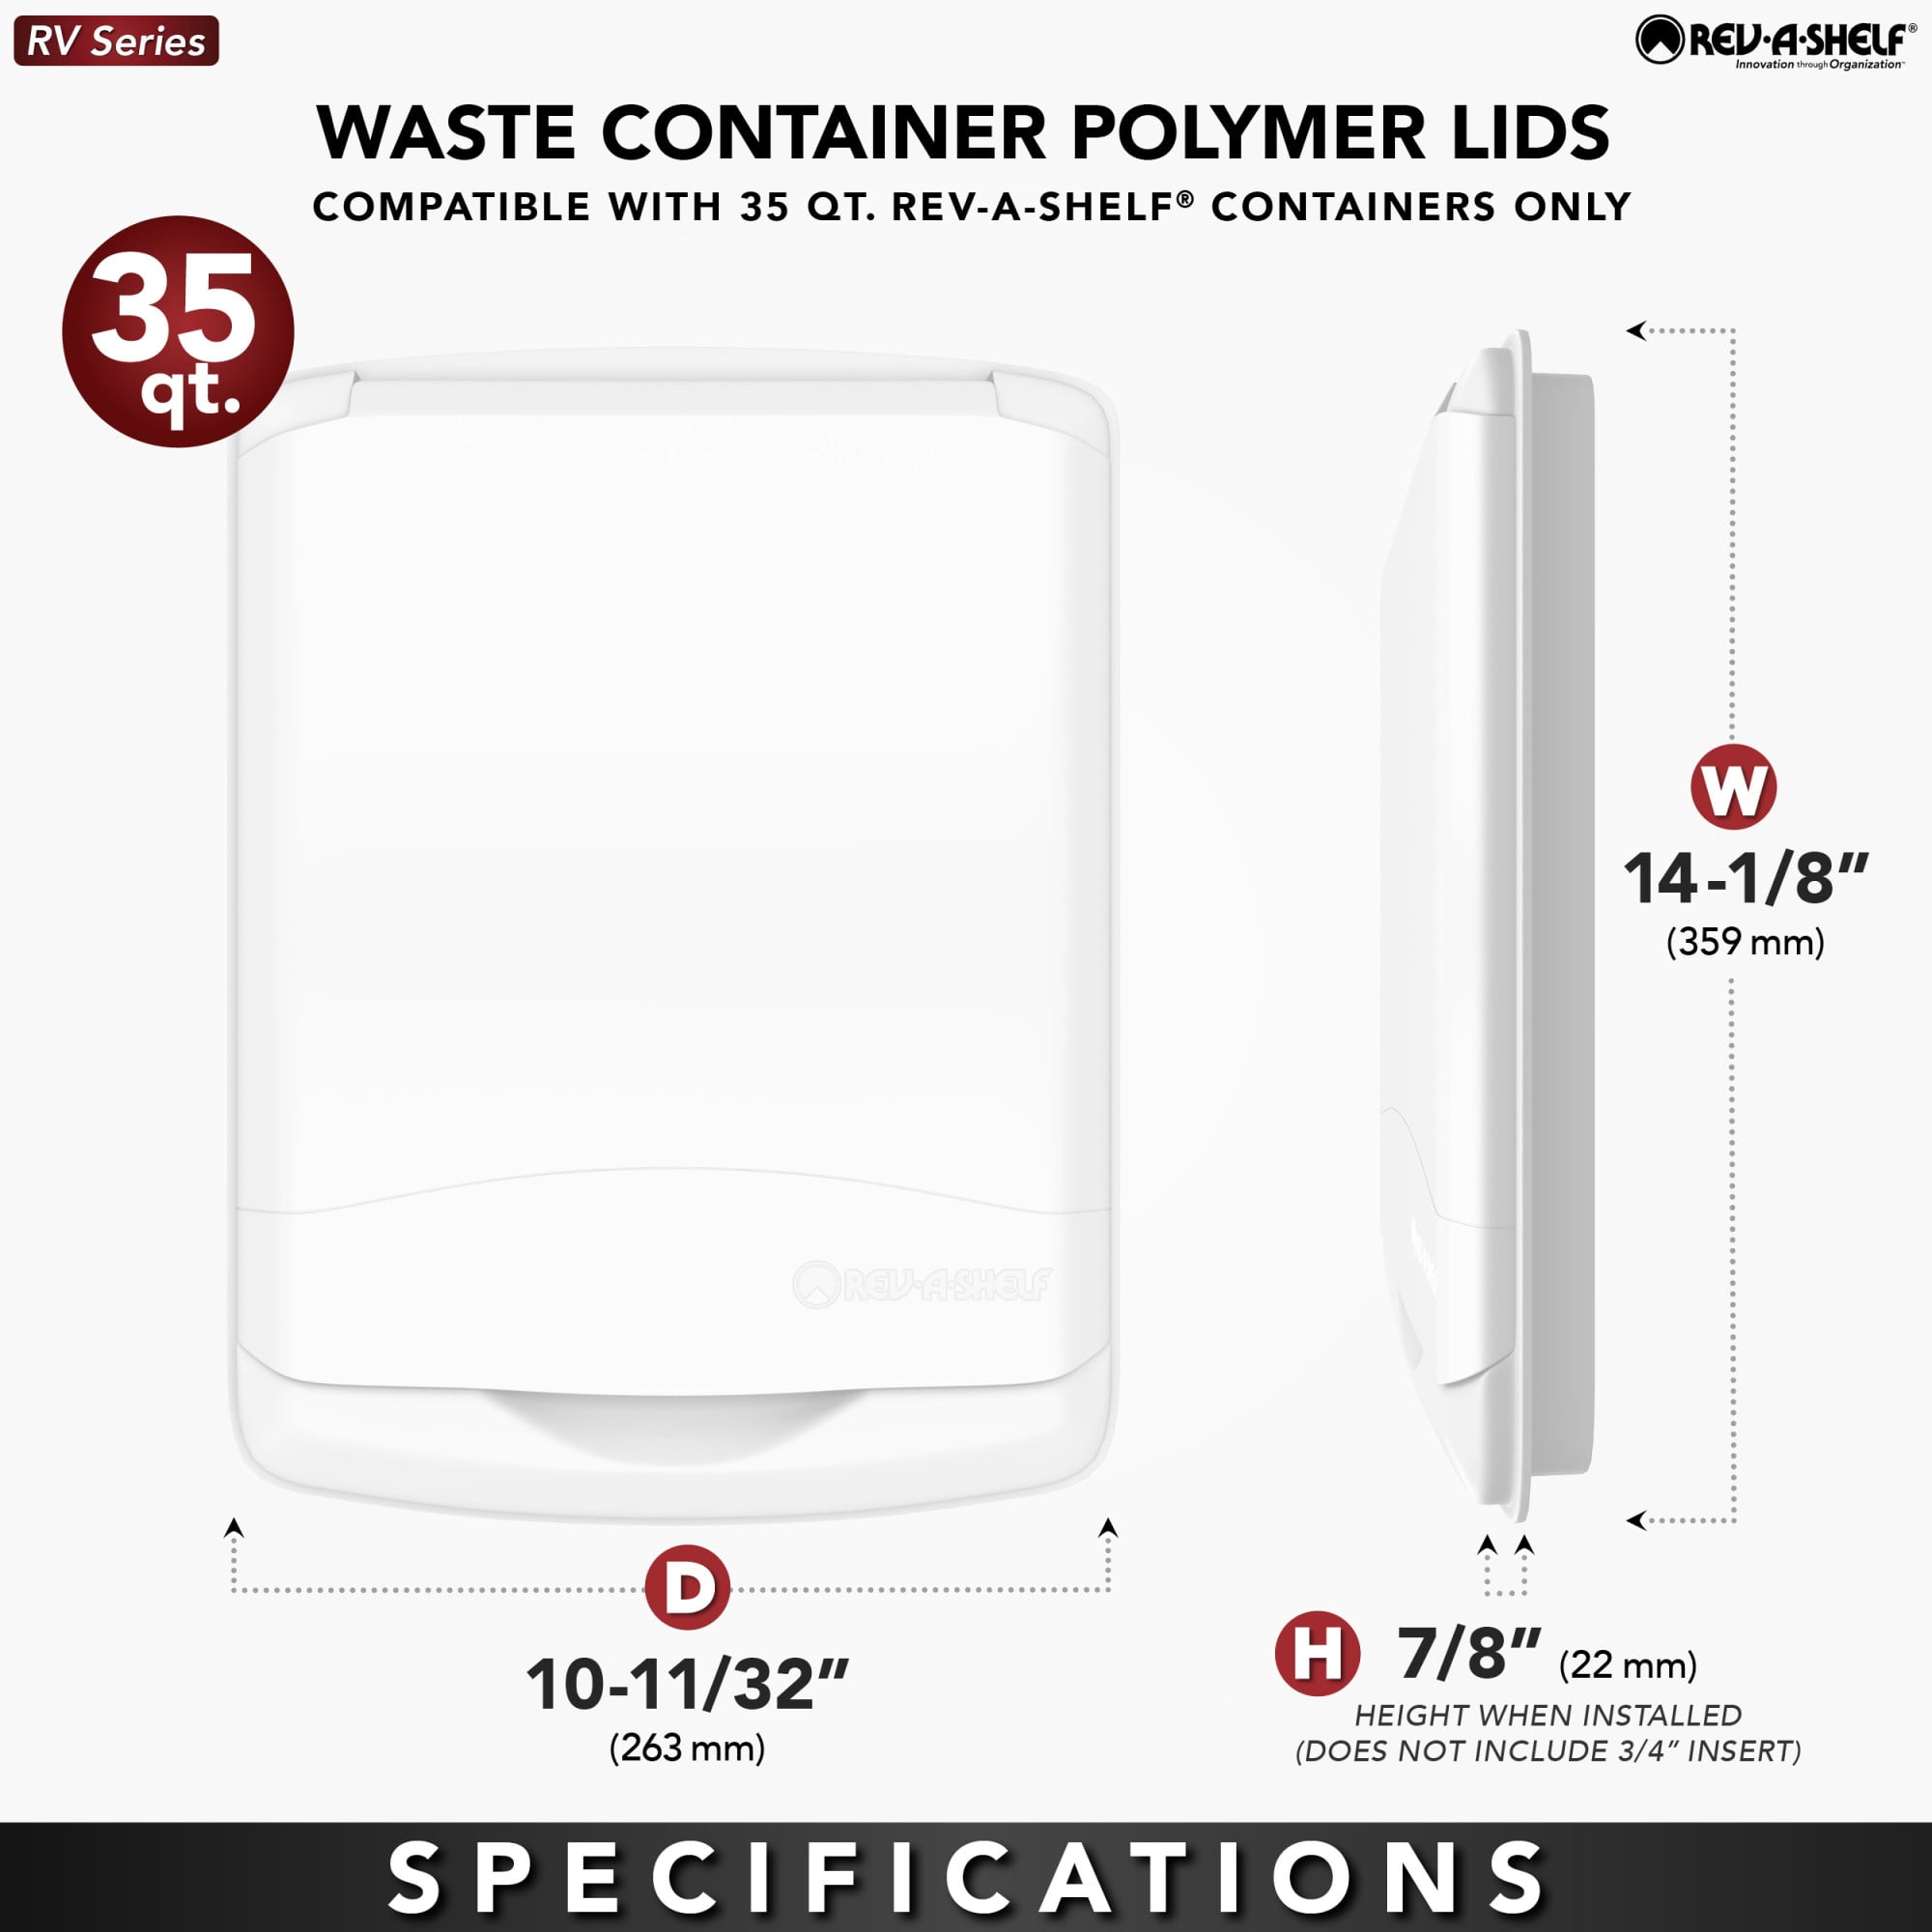 Rev-A-Shelf Polymer Replacement 35qt Waste/Trash Container, Standard, Champagne